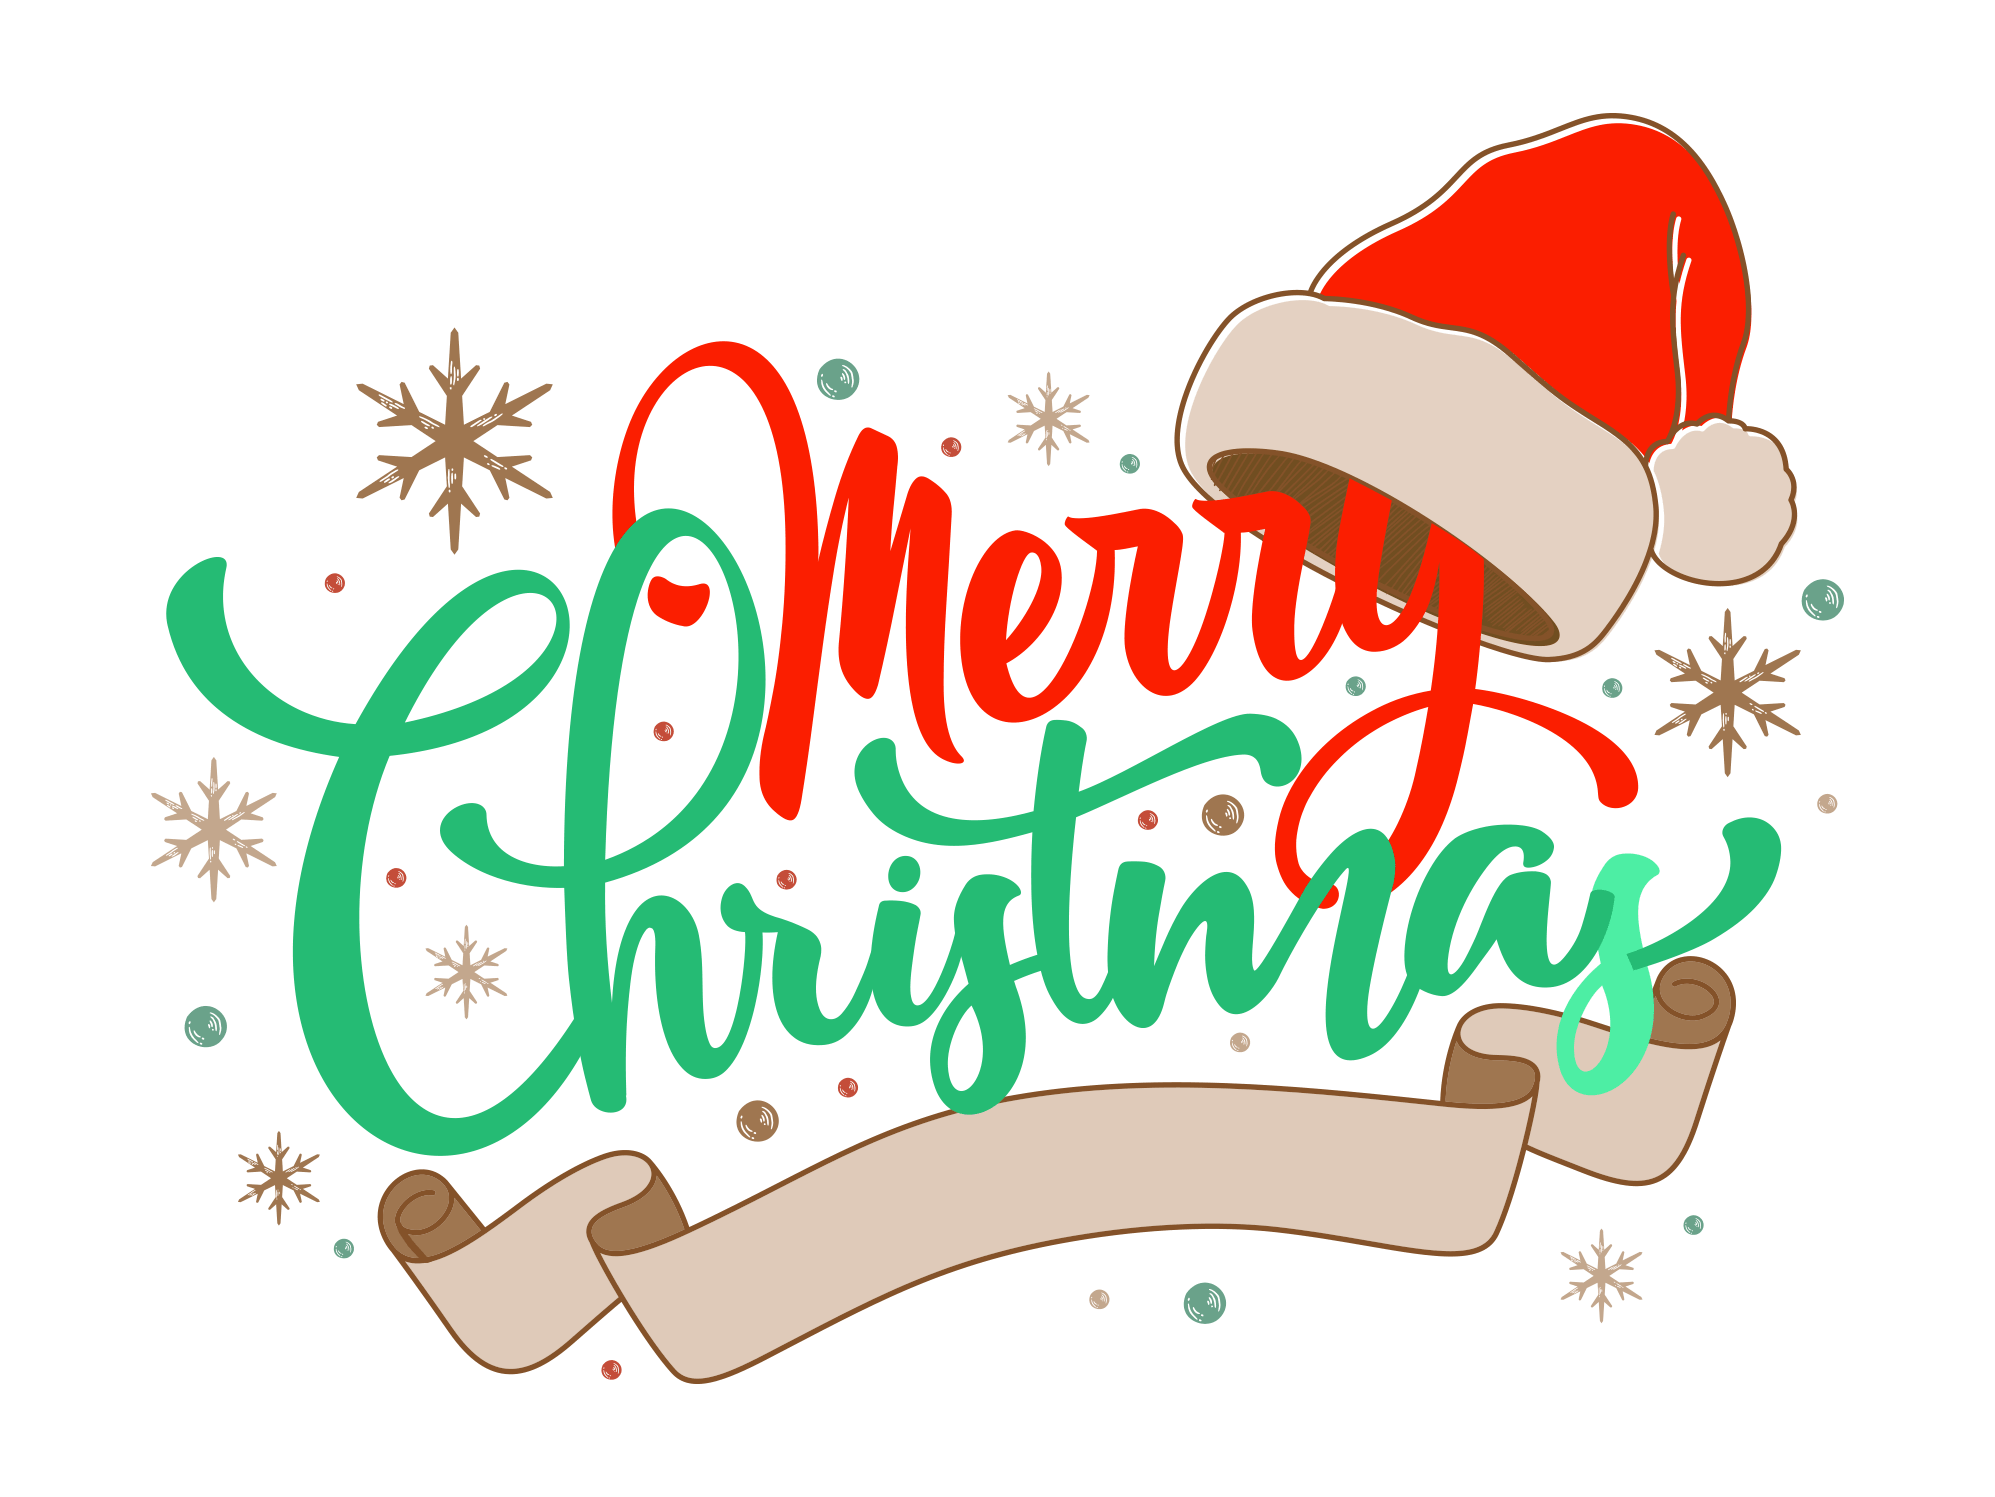 Merry Christmas Text PNG HQ Image Transparent - Merry Christmas Png